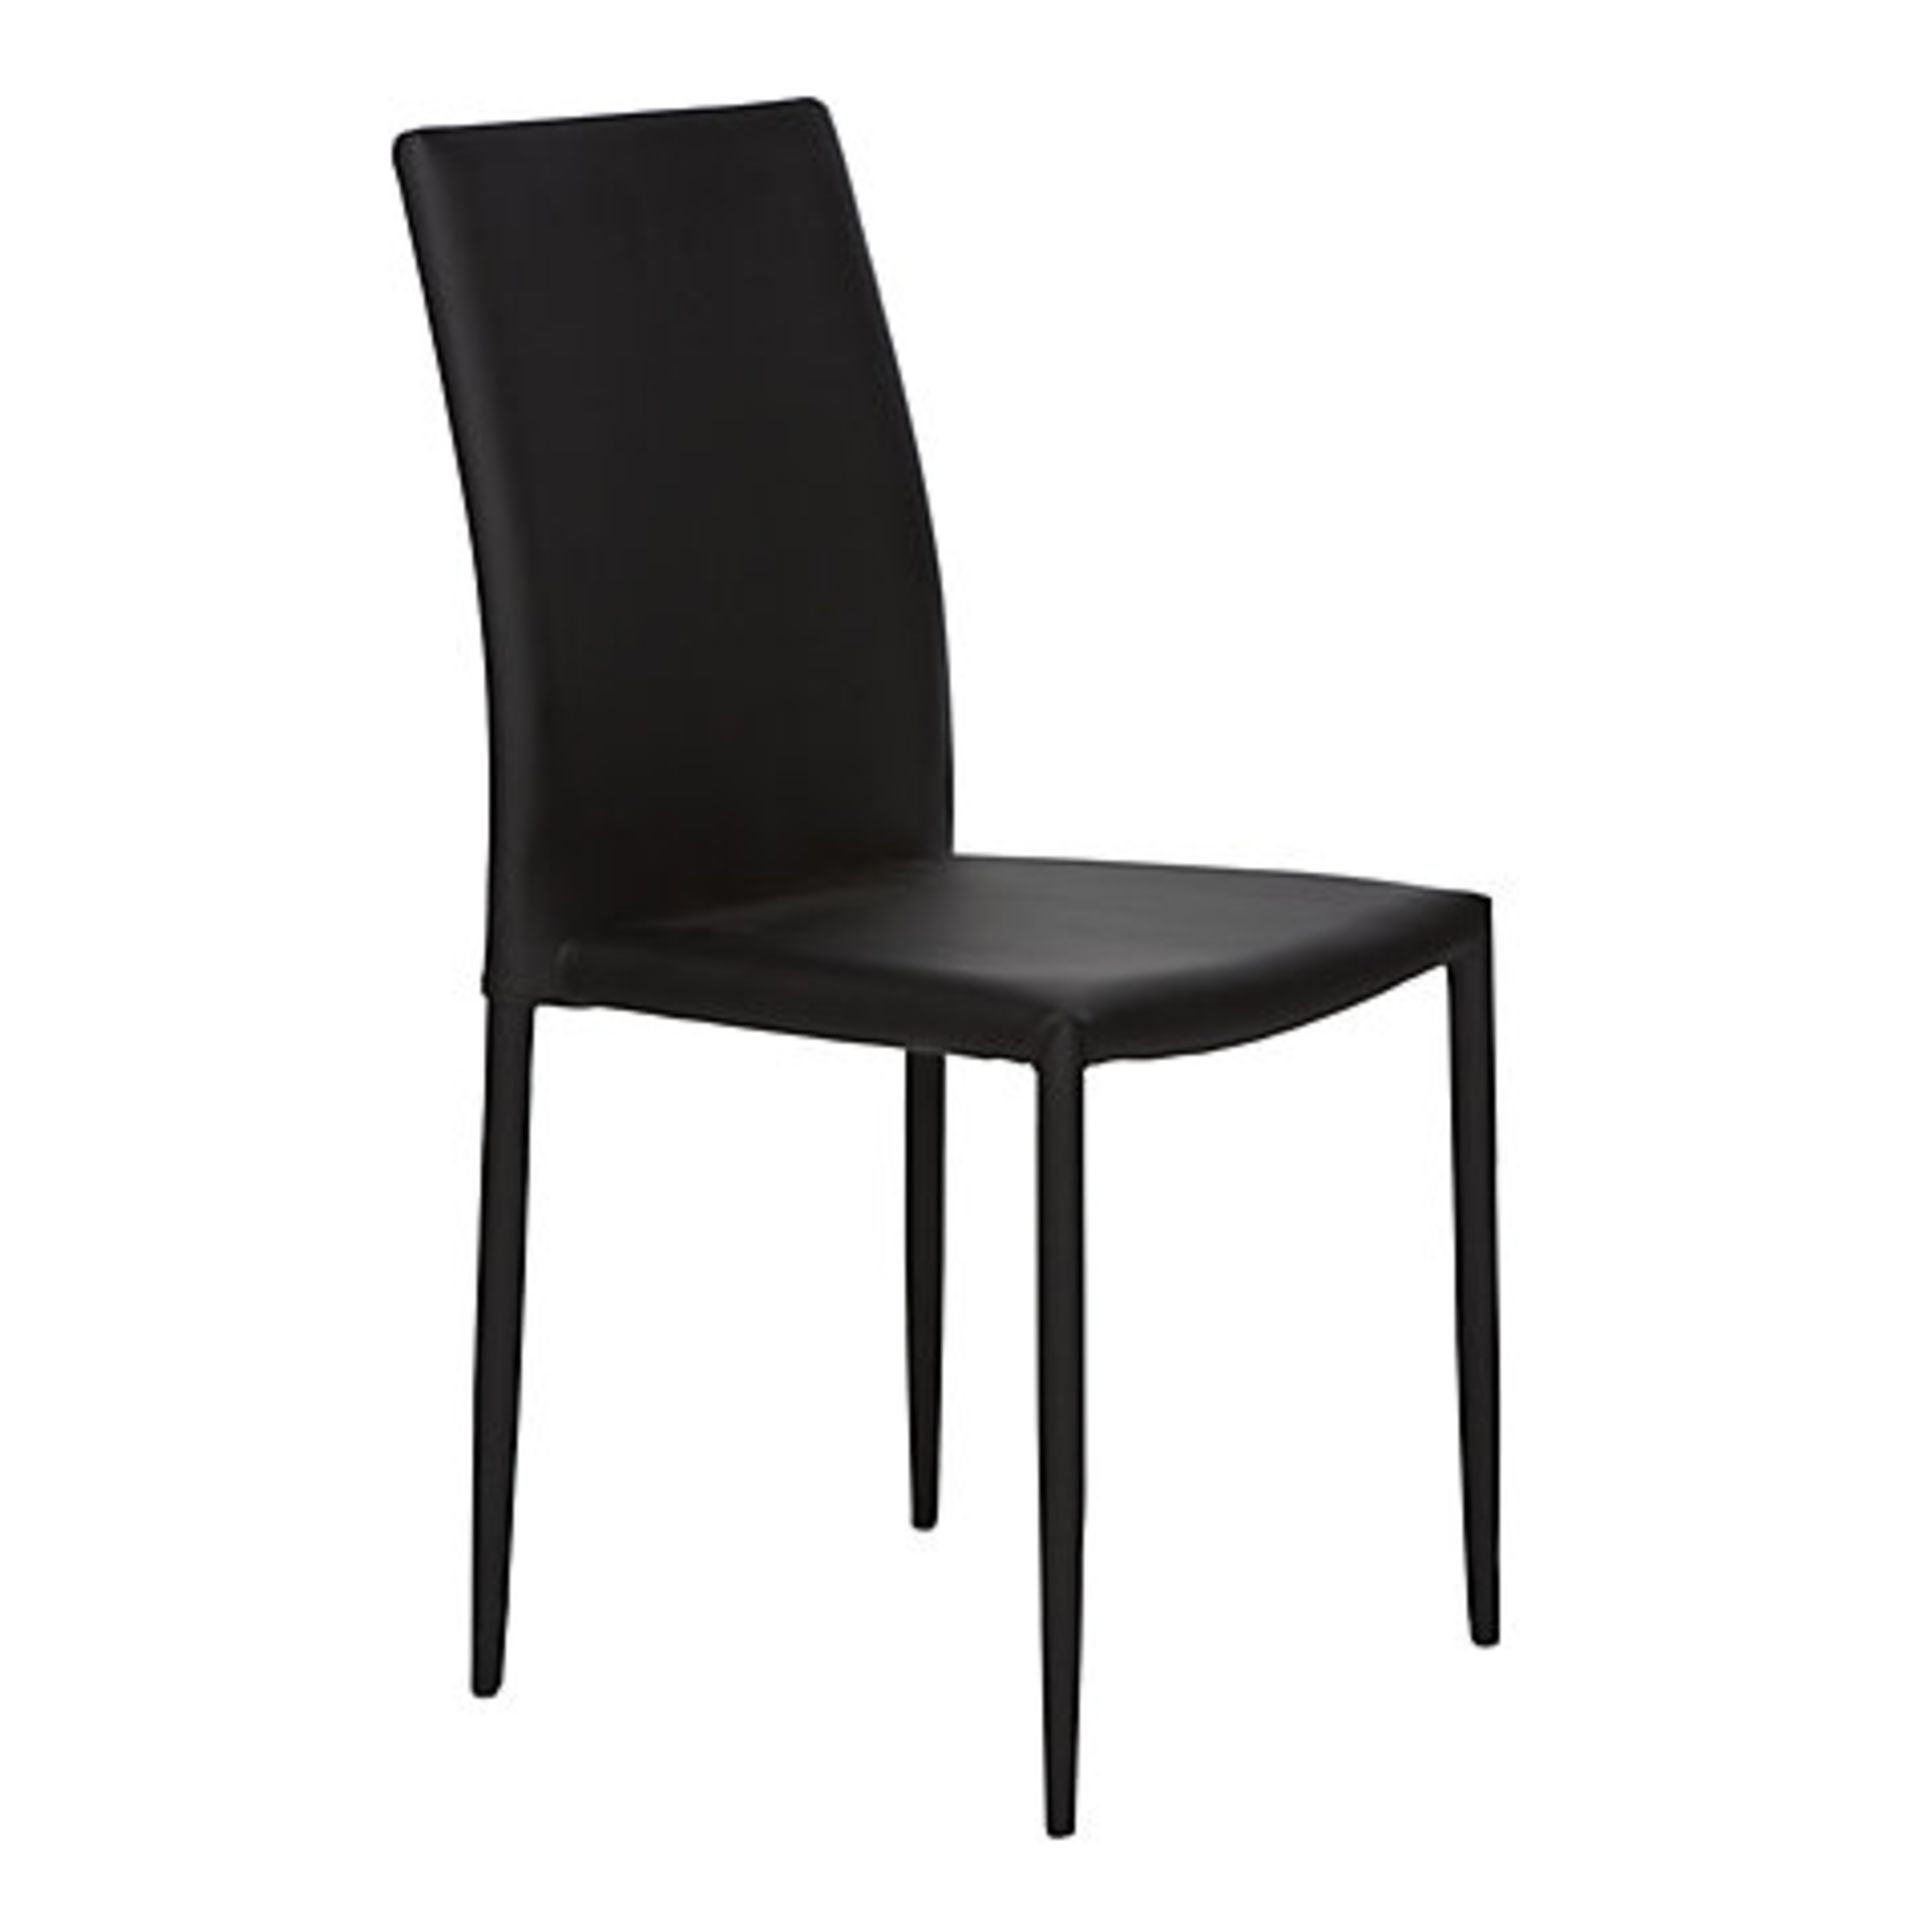 1 x BOXED PIANA LEATHER AND CHROME DESIGNER DINING CHAIR (2160772) RRP £110 (1.9.16) *PLEASE NOTE